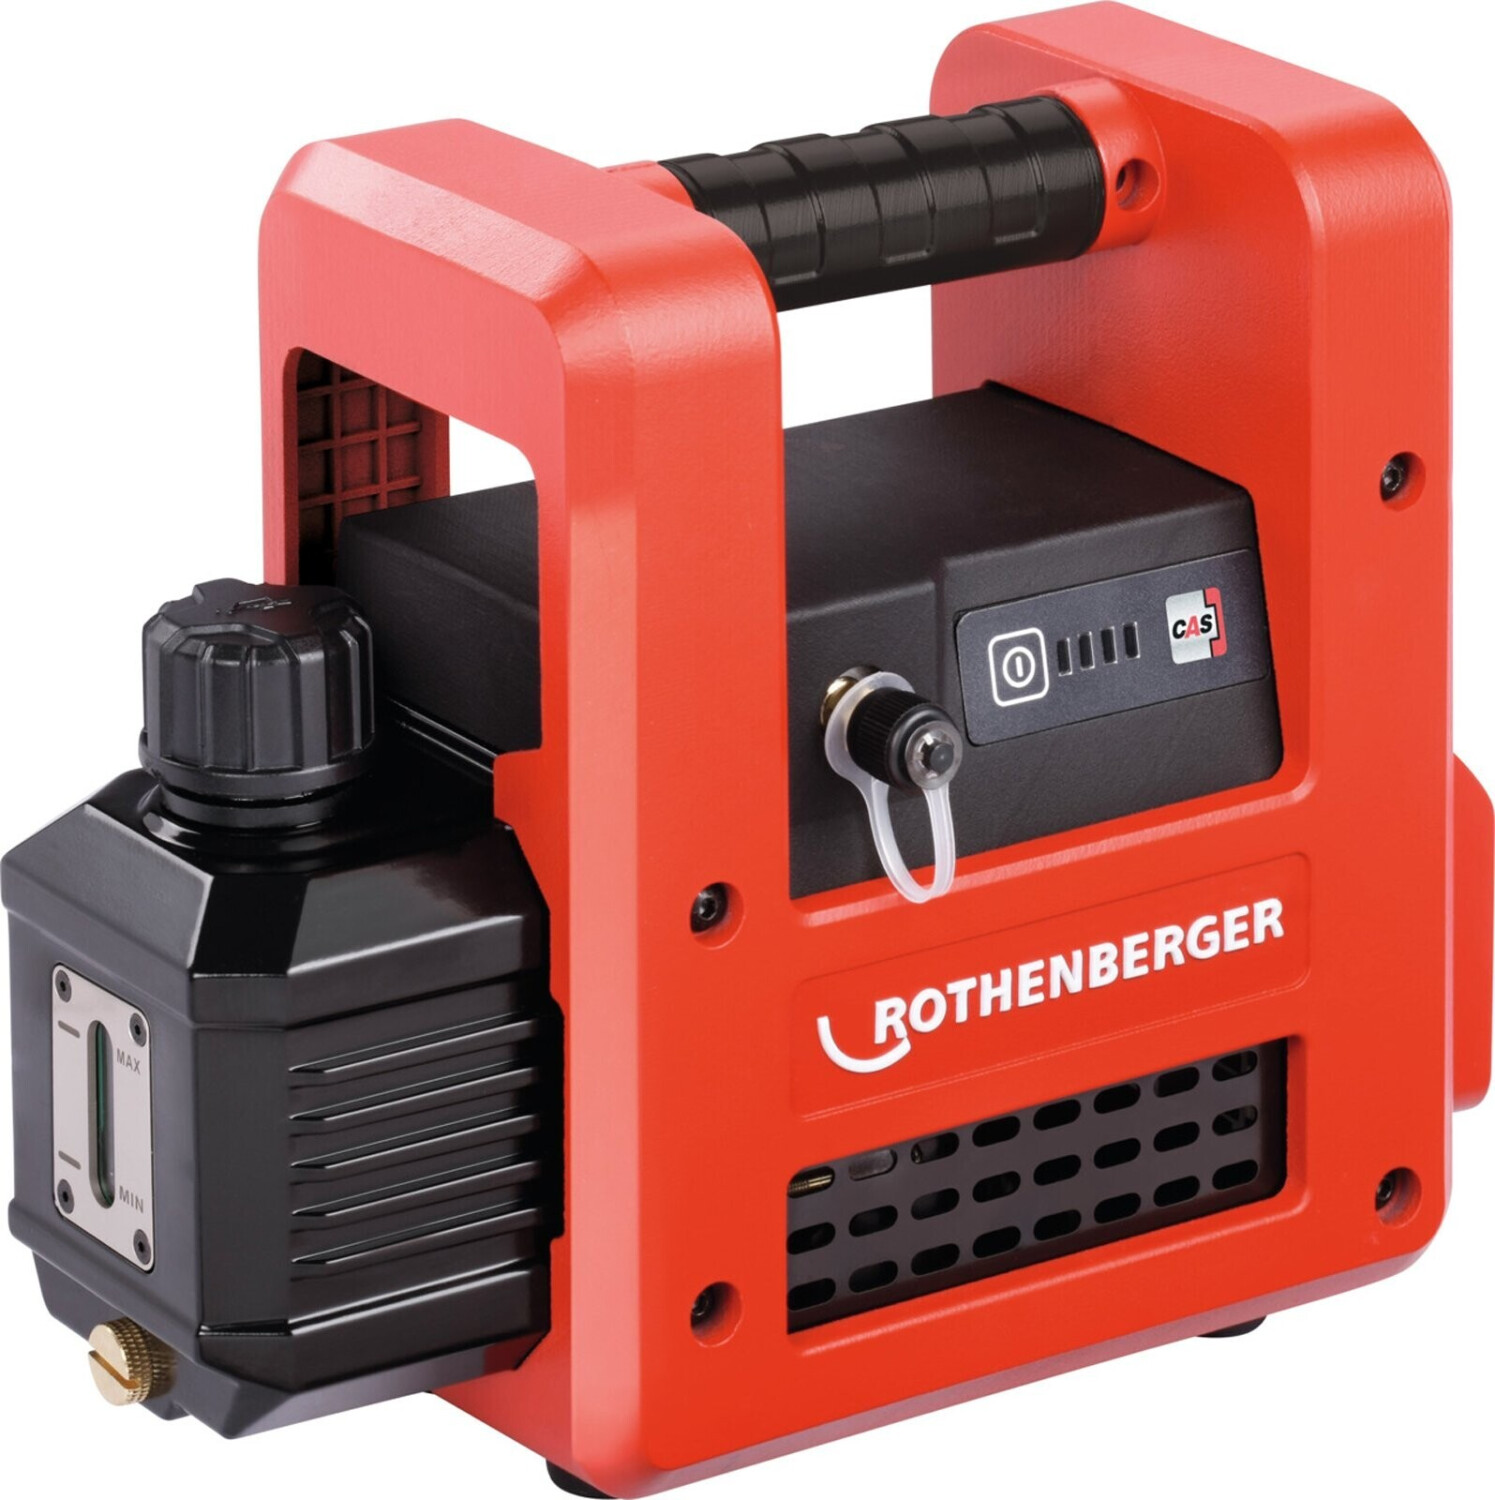 Rothenberger ROAIRVAC R32 2.0 CL ab 430,90 €